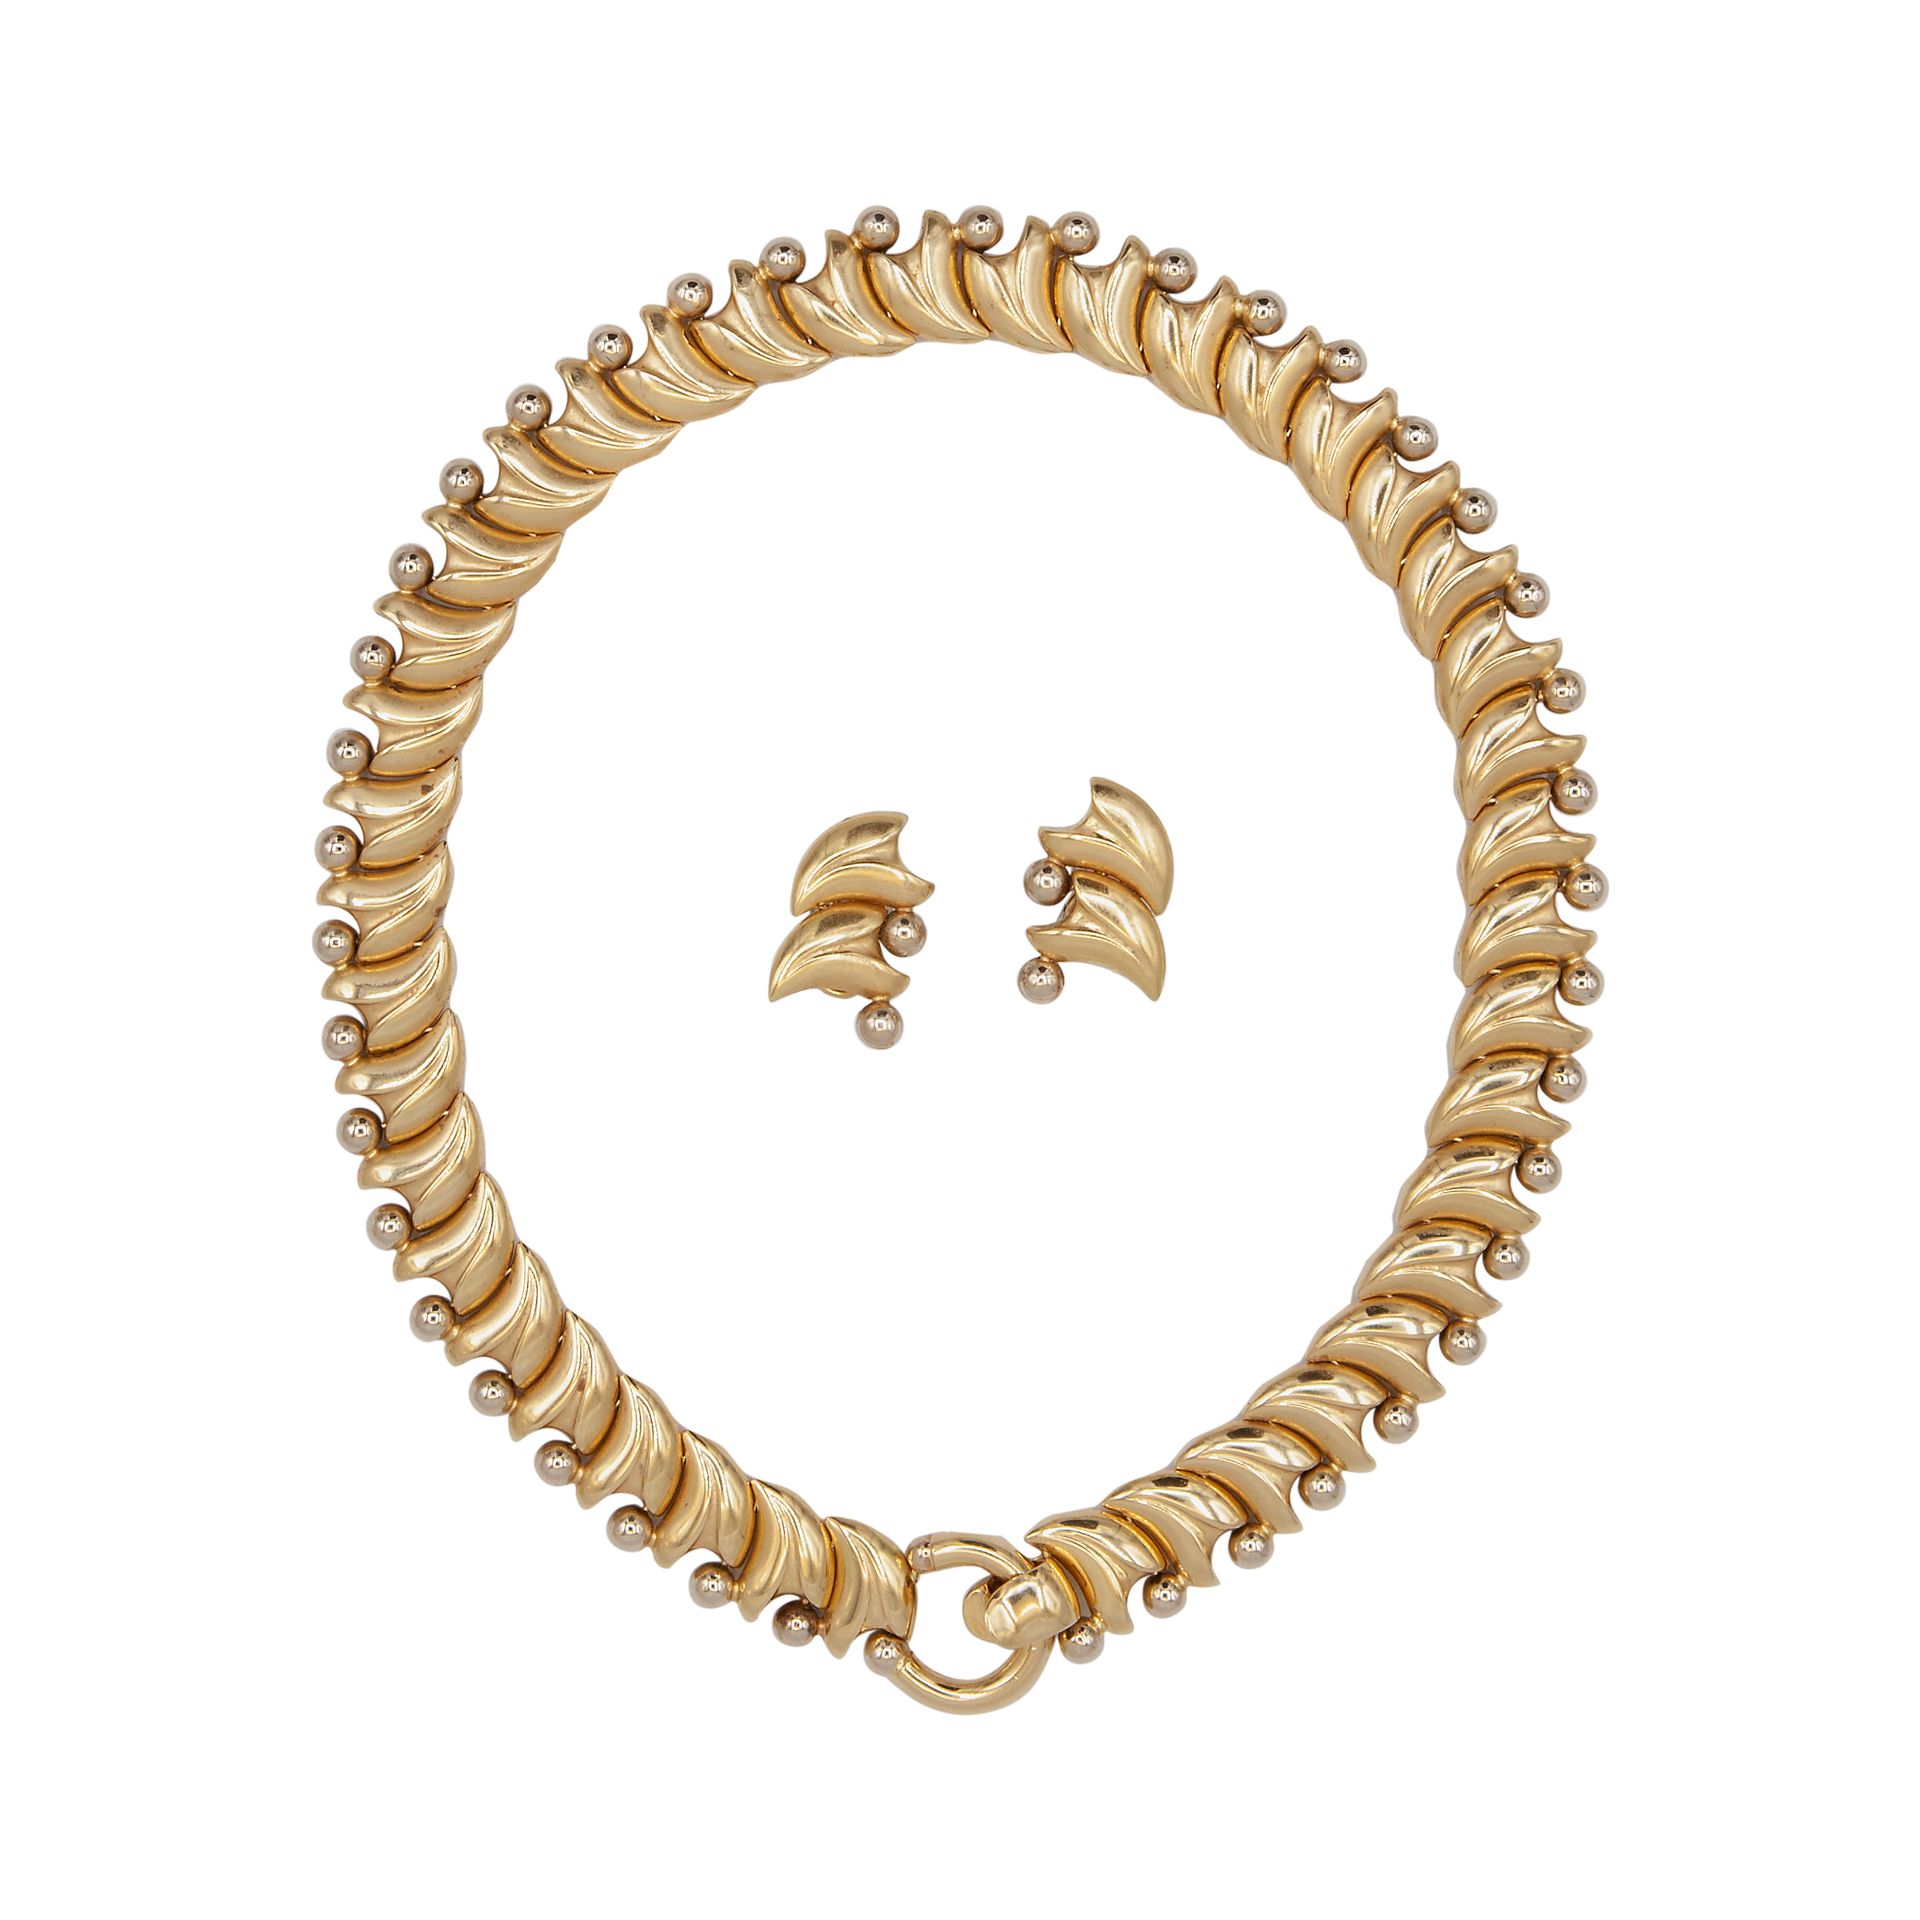 Null Parure composed of necklace and earrings in 18kt yellow gold. Necklace leng&hellip;